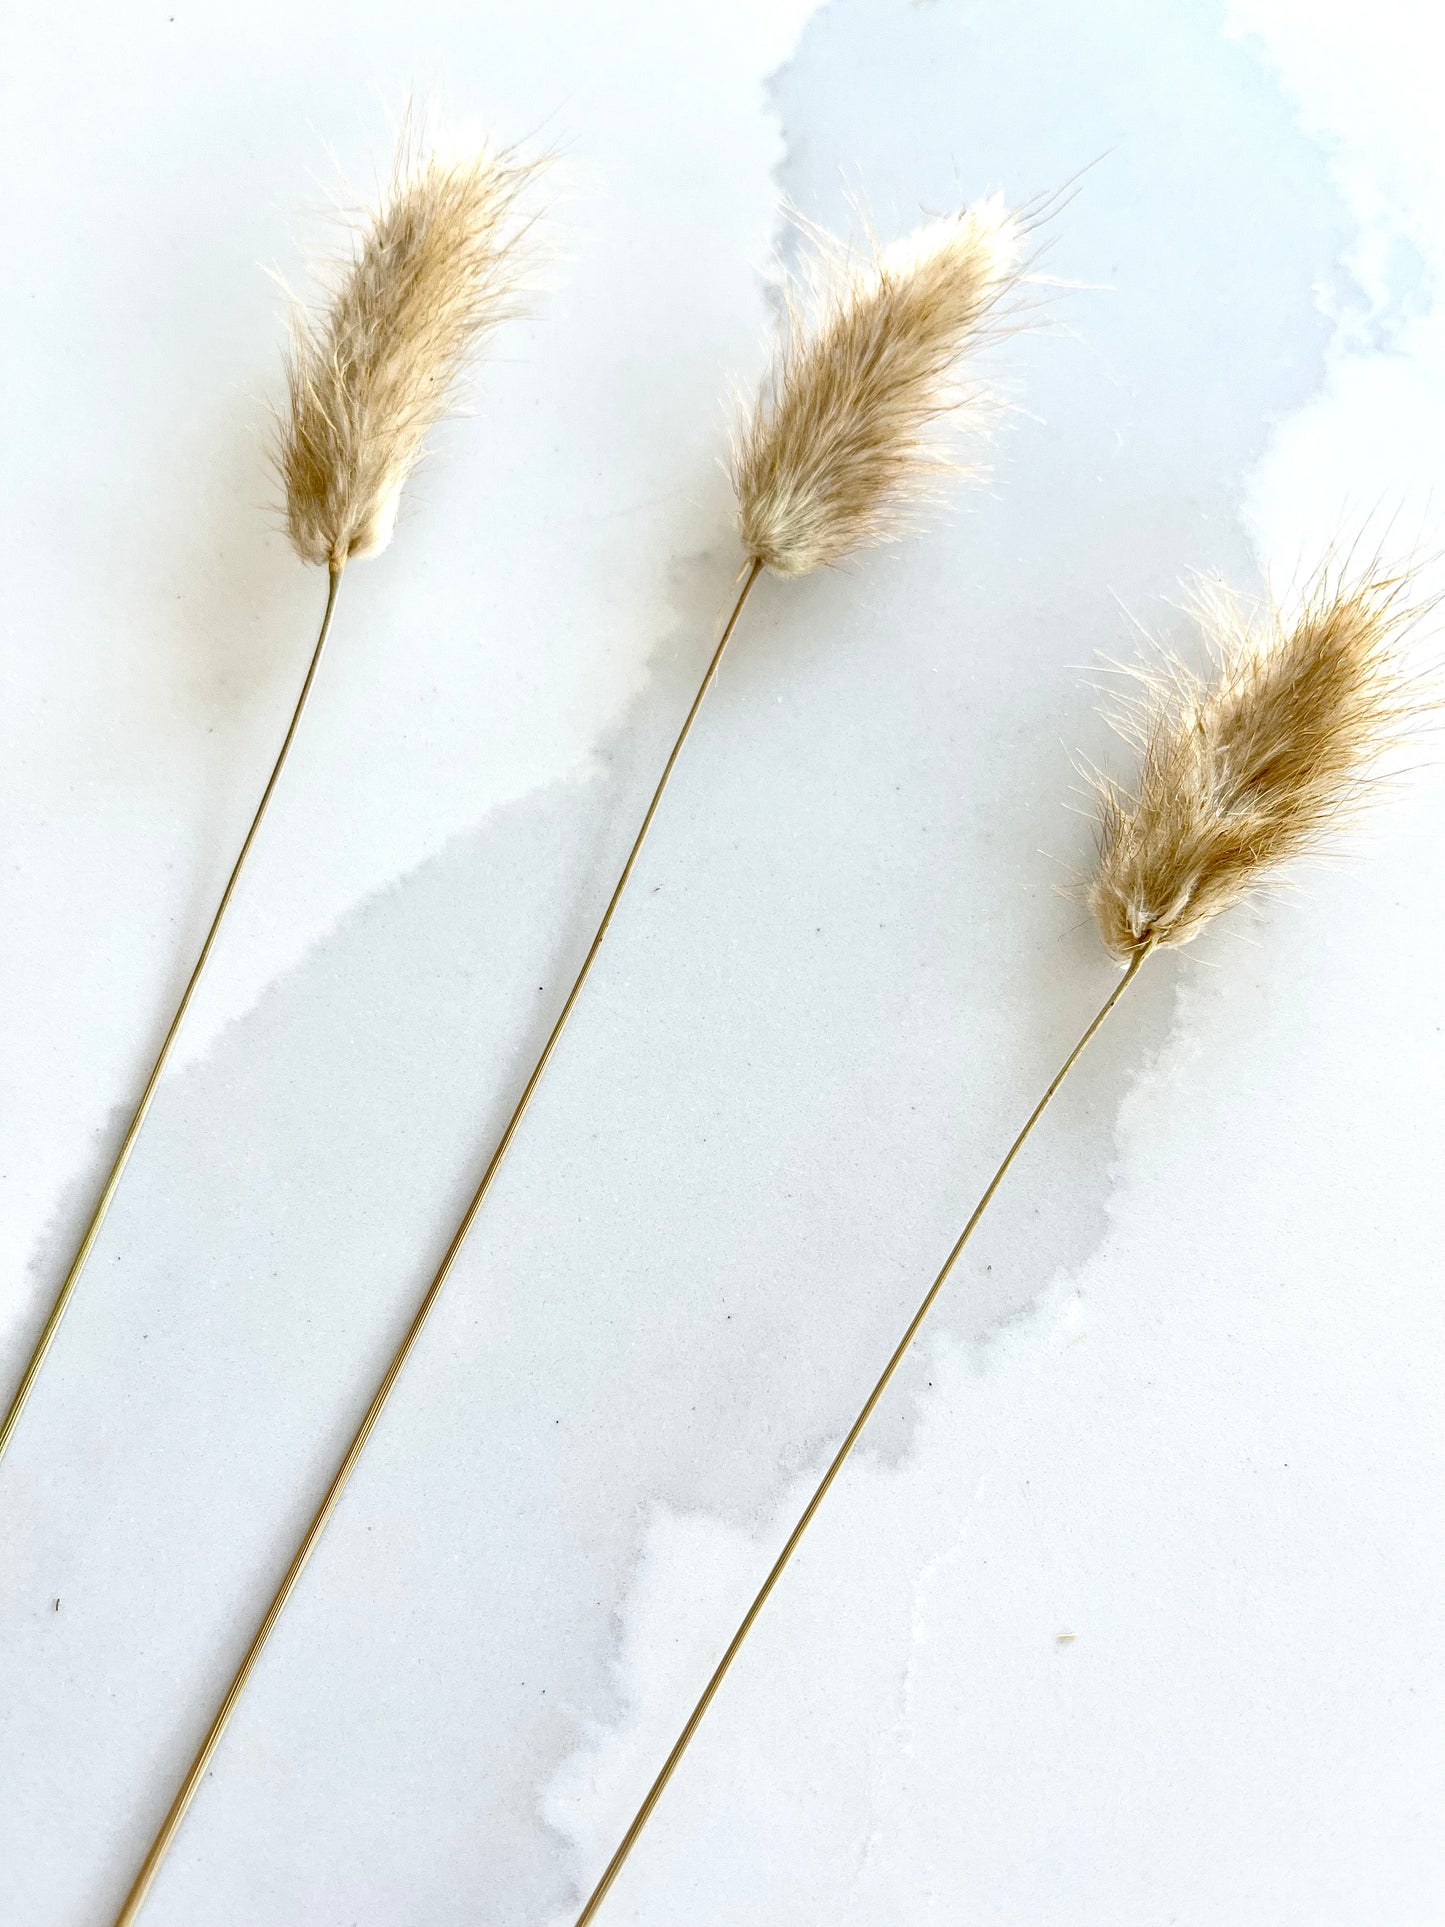 Assorted Dried Grass, Sold by the Stem